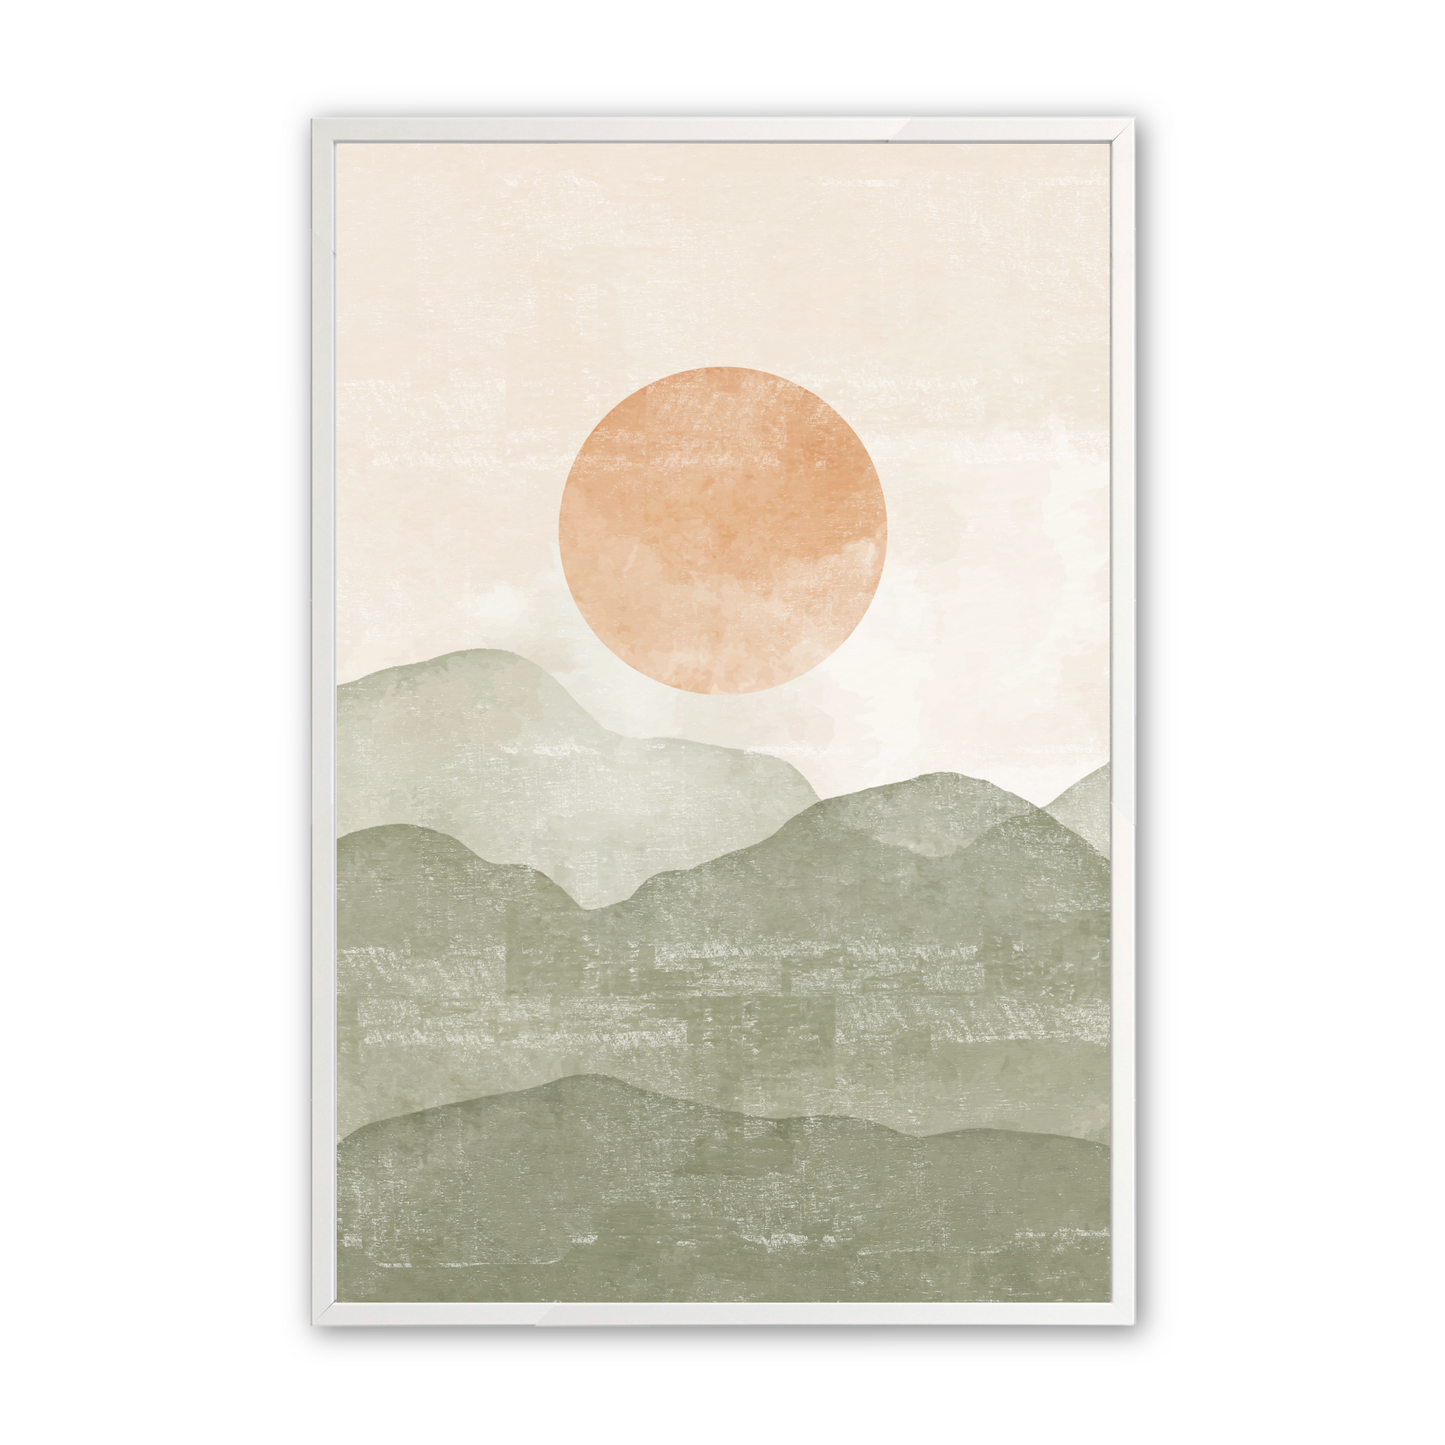 [color:Opaque White], Picture of the third of 3 mountain illustrations in white frame